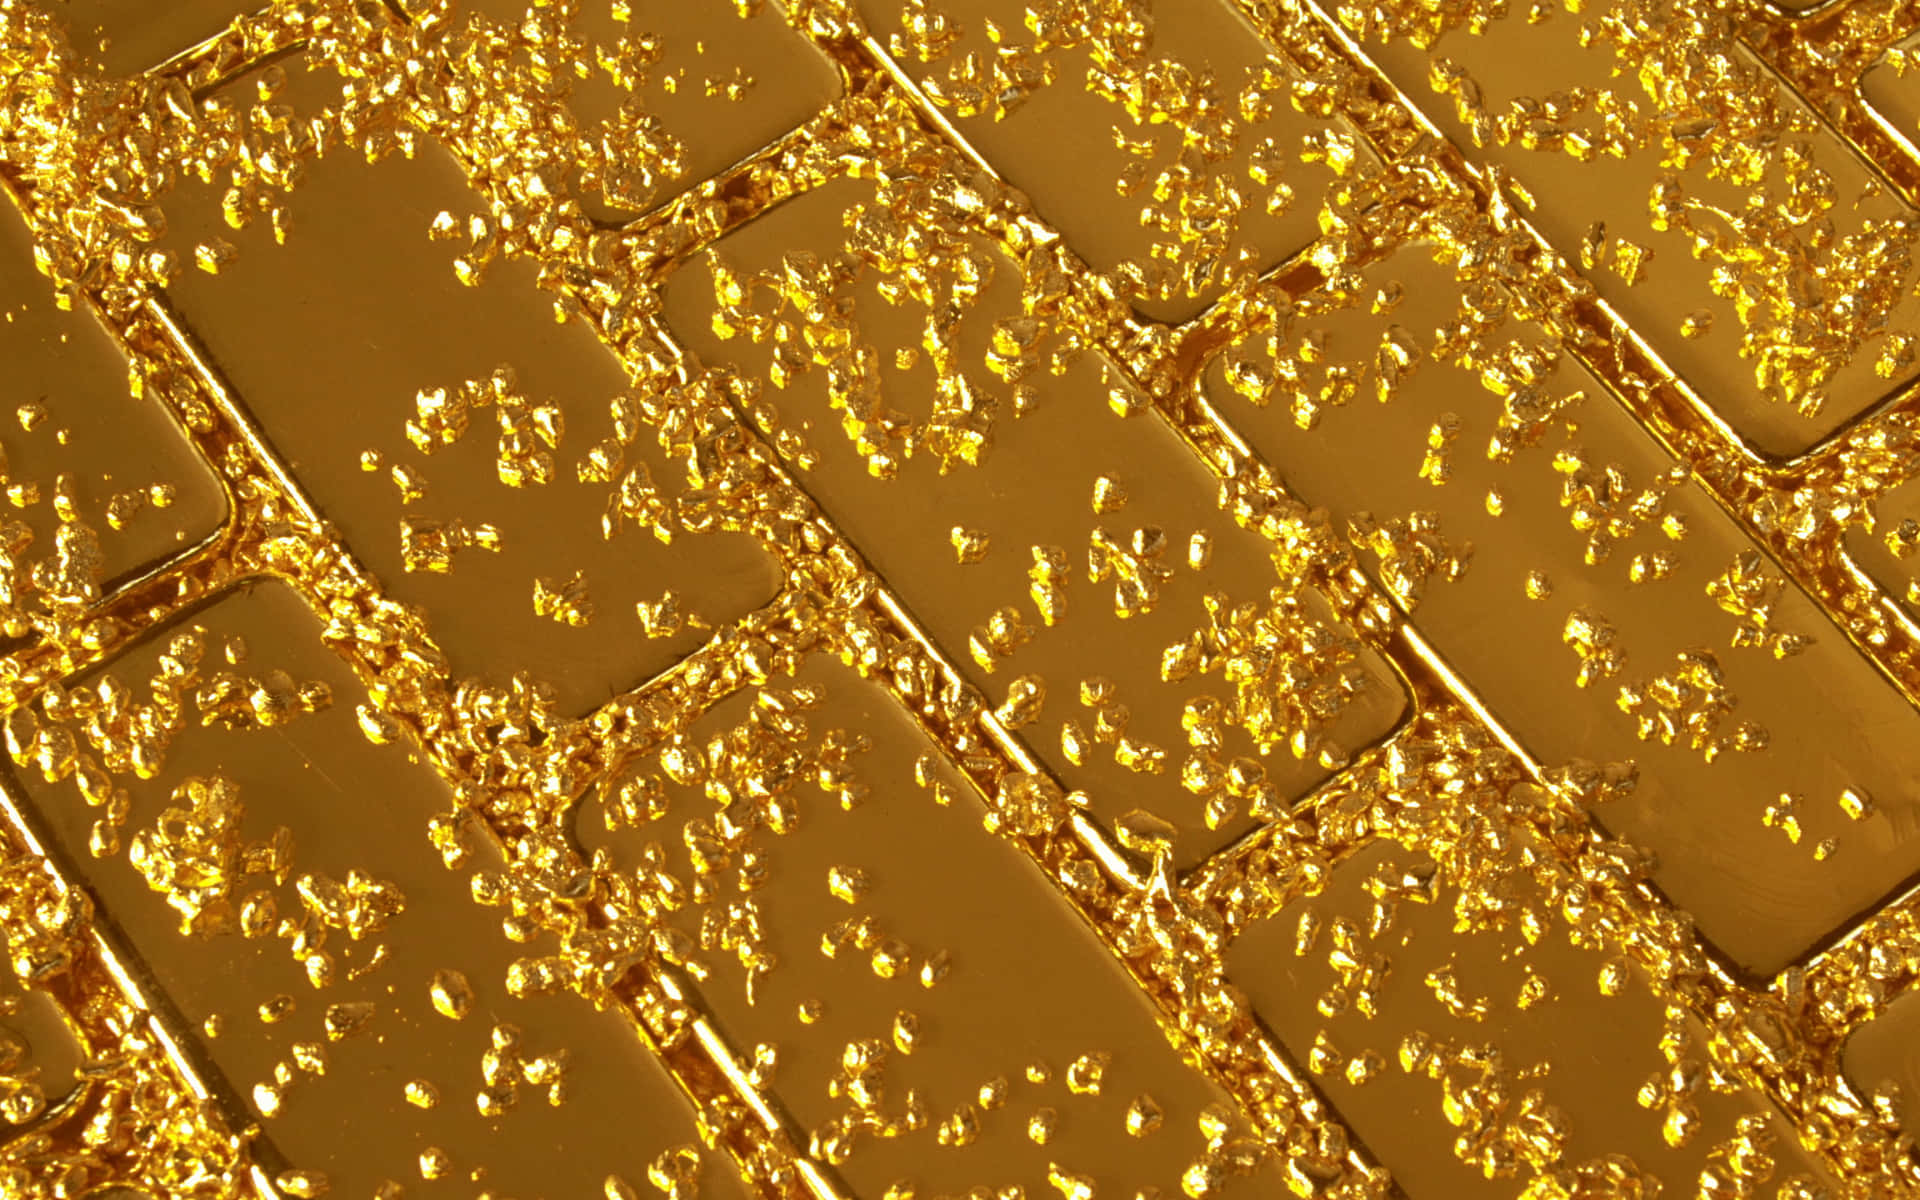 Golden Bars With Flakes Background